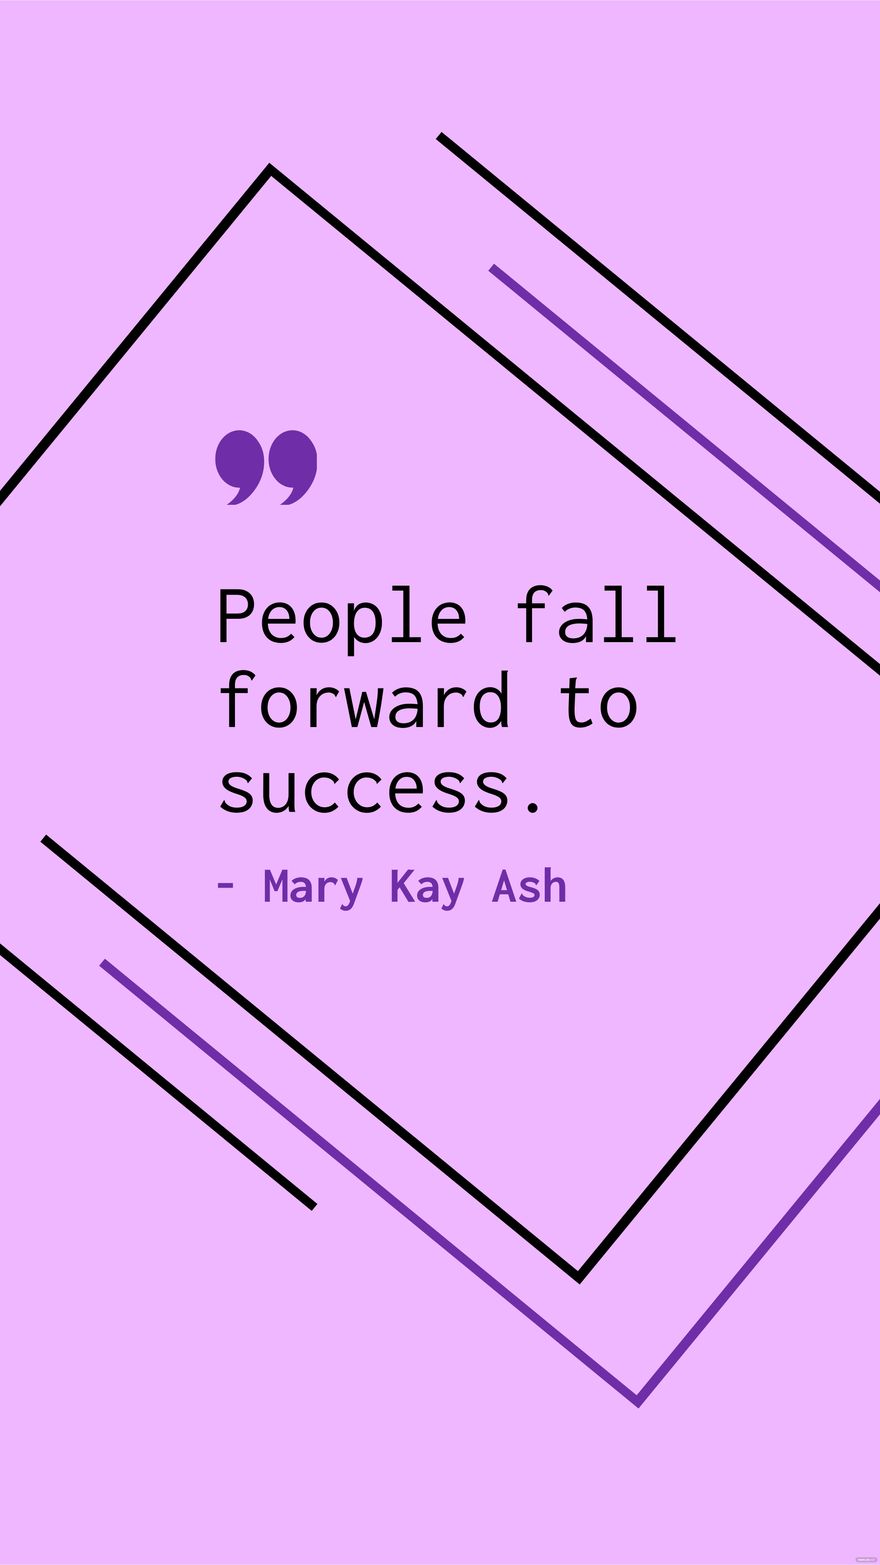 Mary Kay Ash - People fall forward to success. in JPG